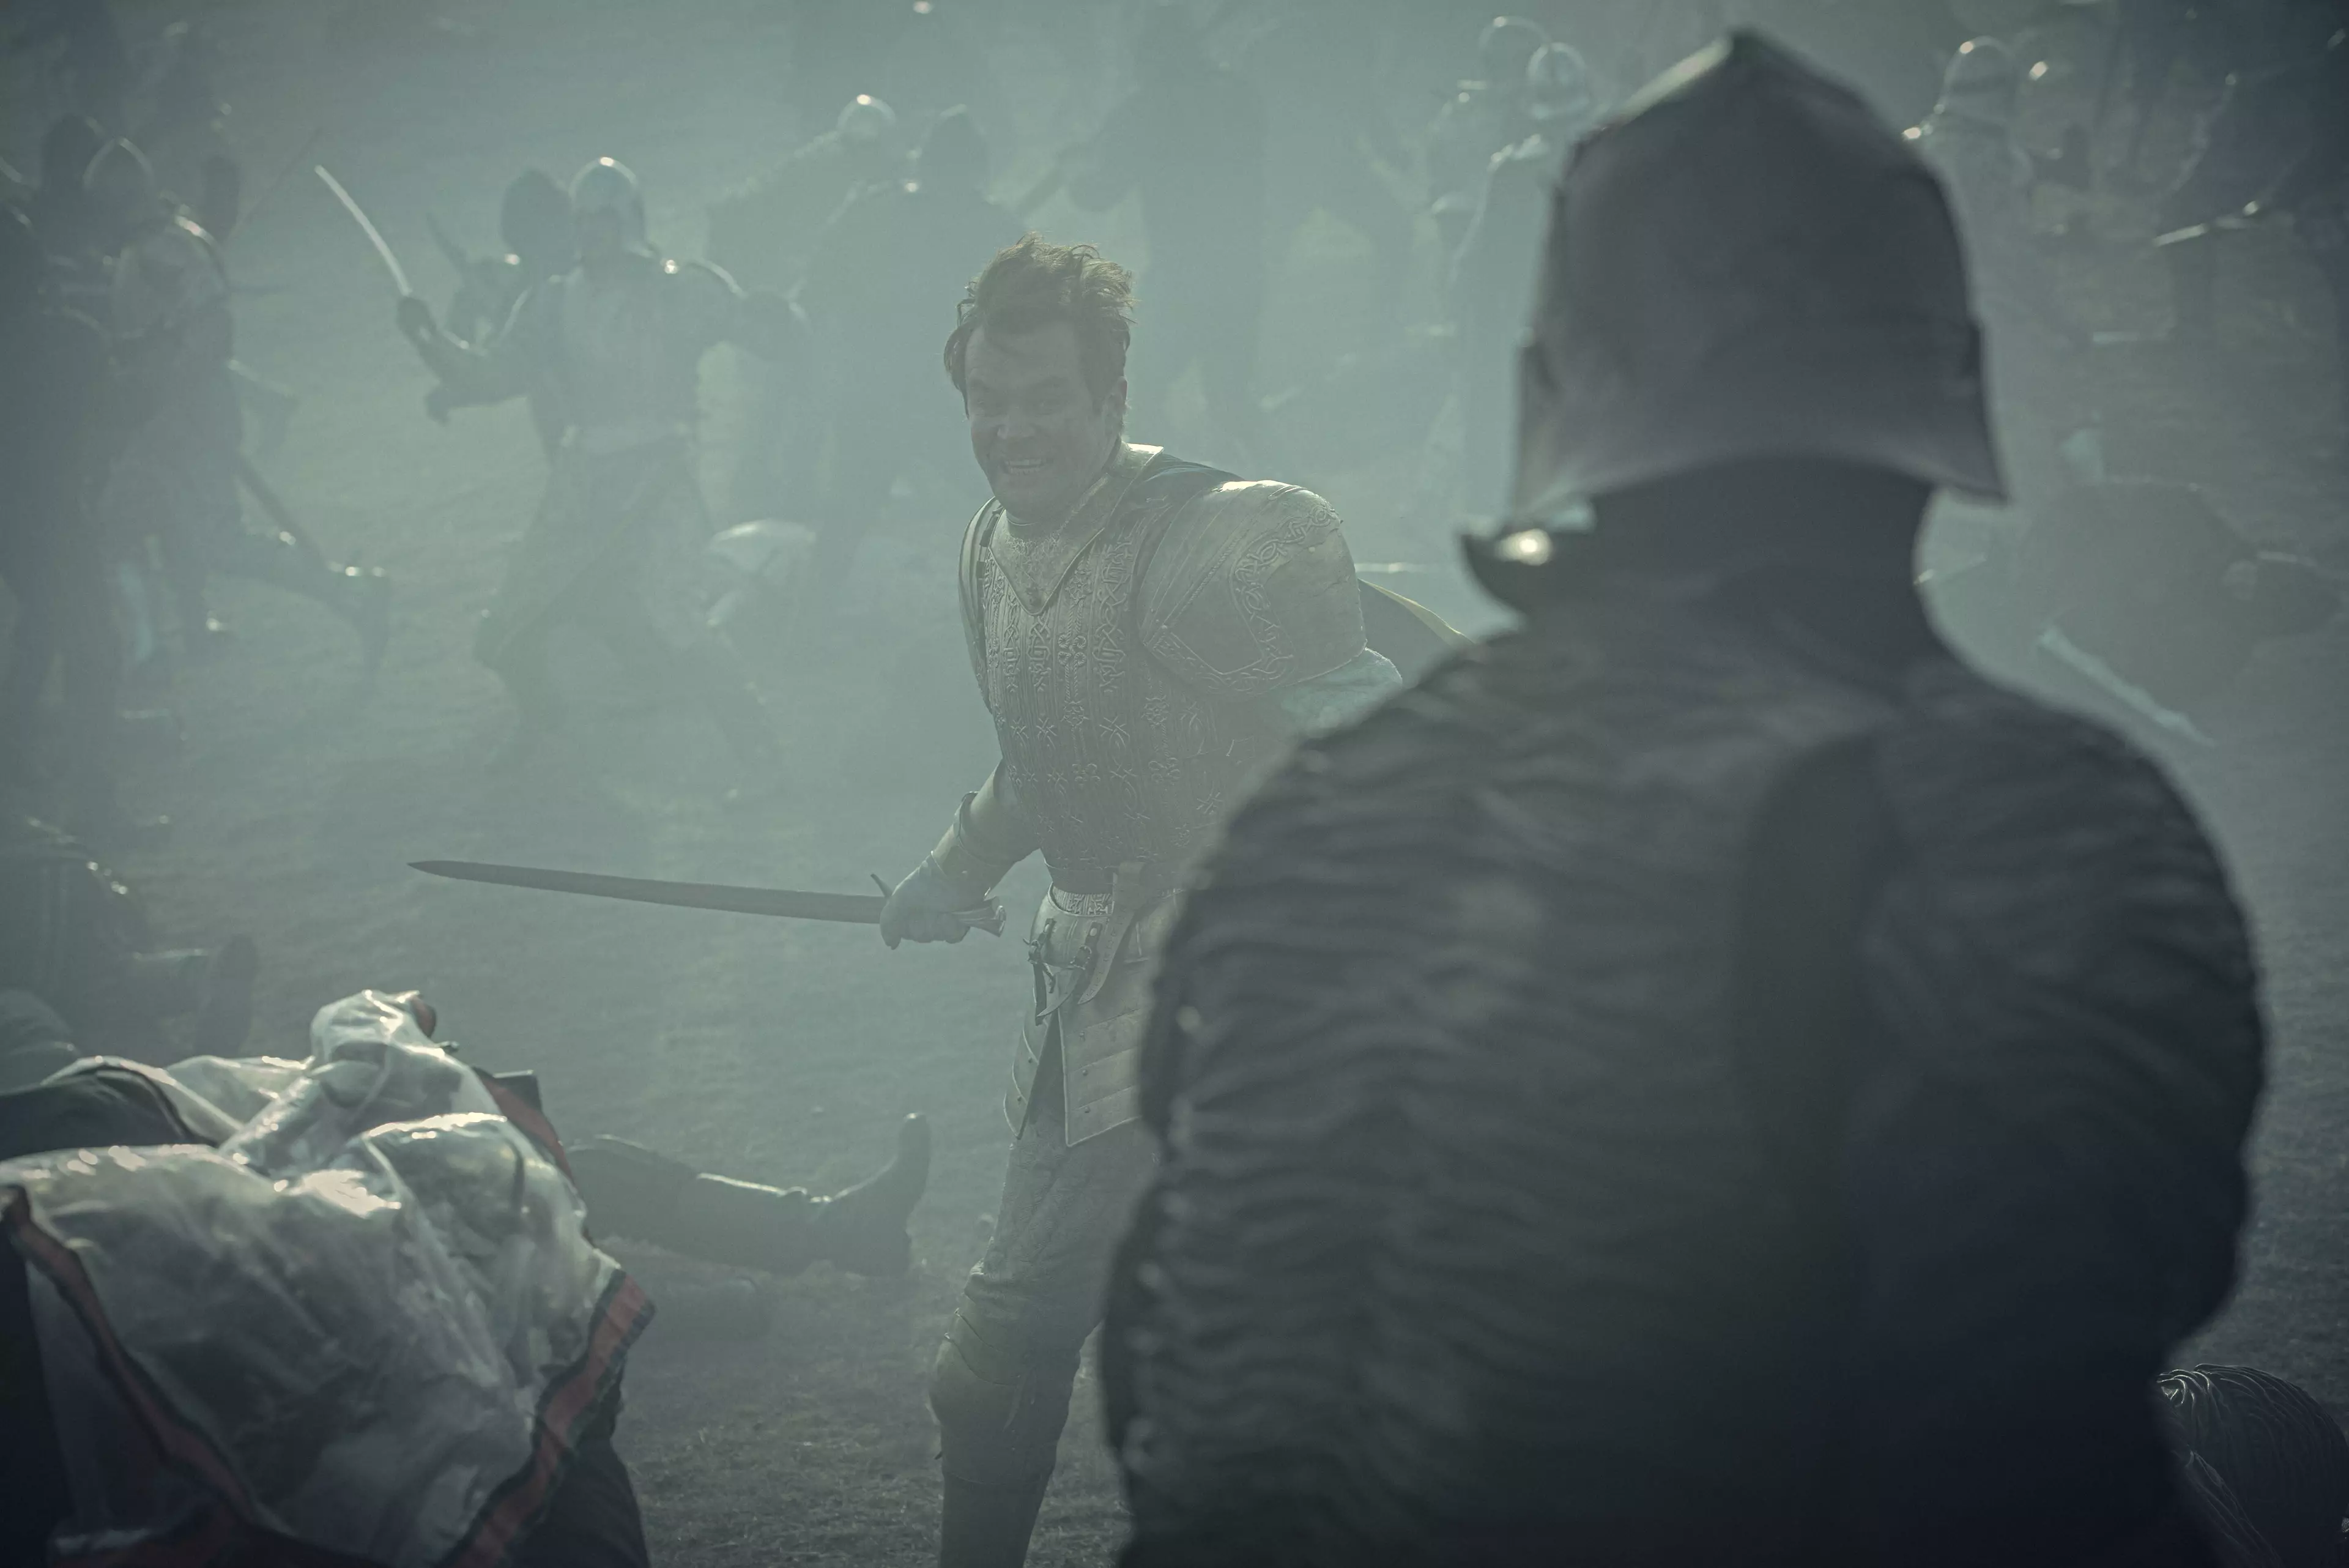 The Witcher features many scenes of bloody combat